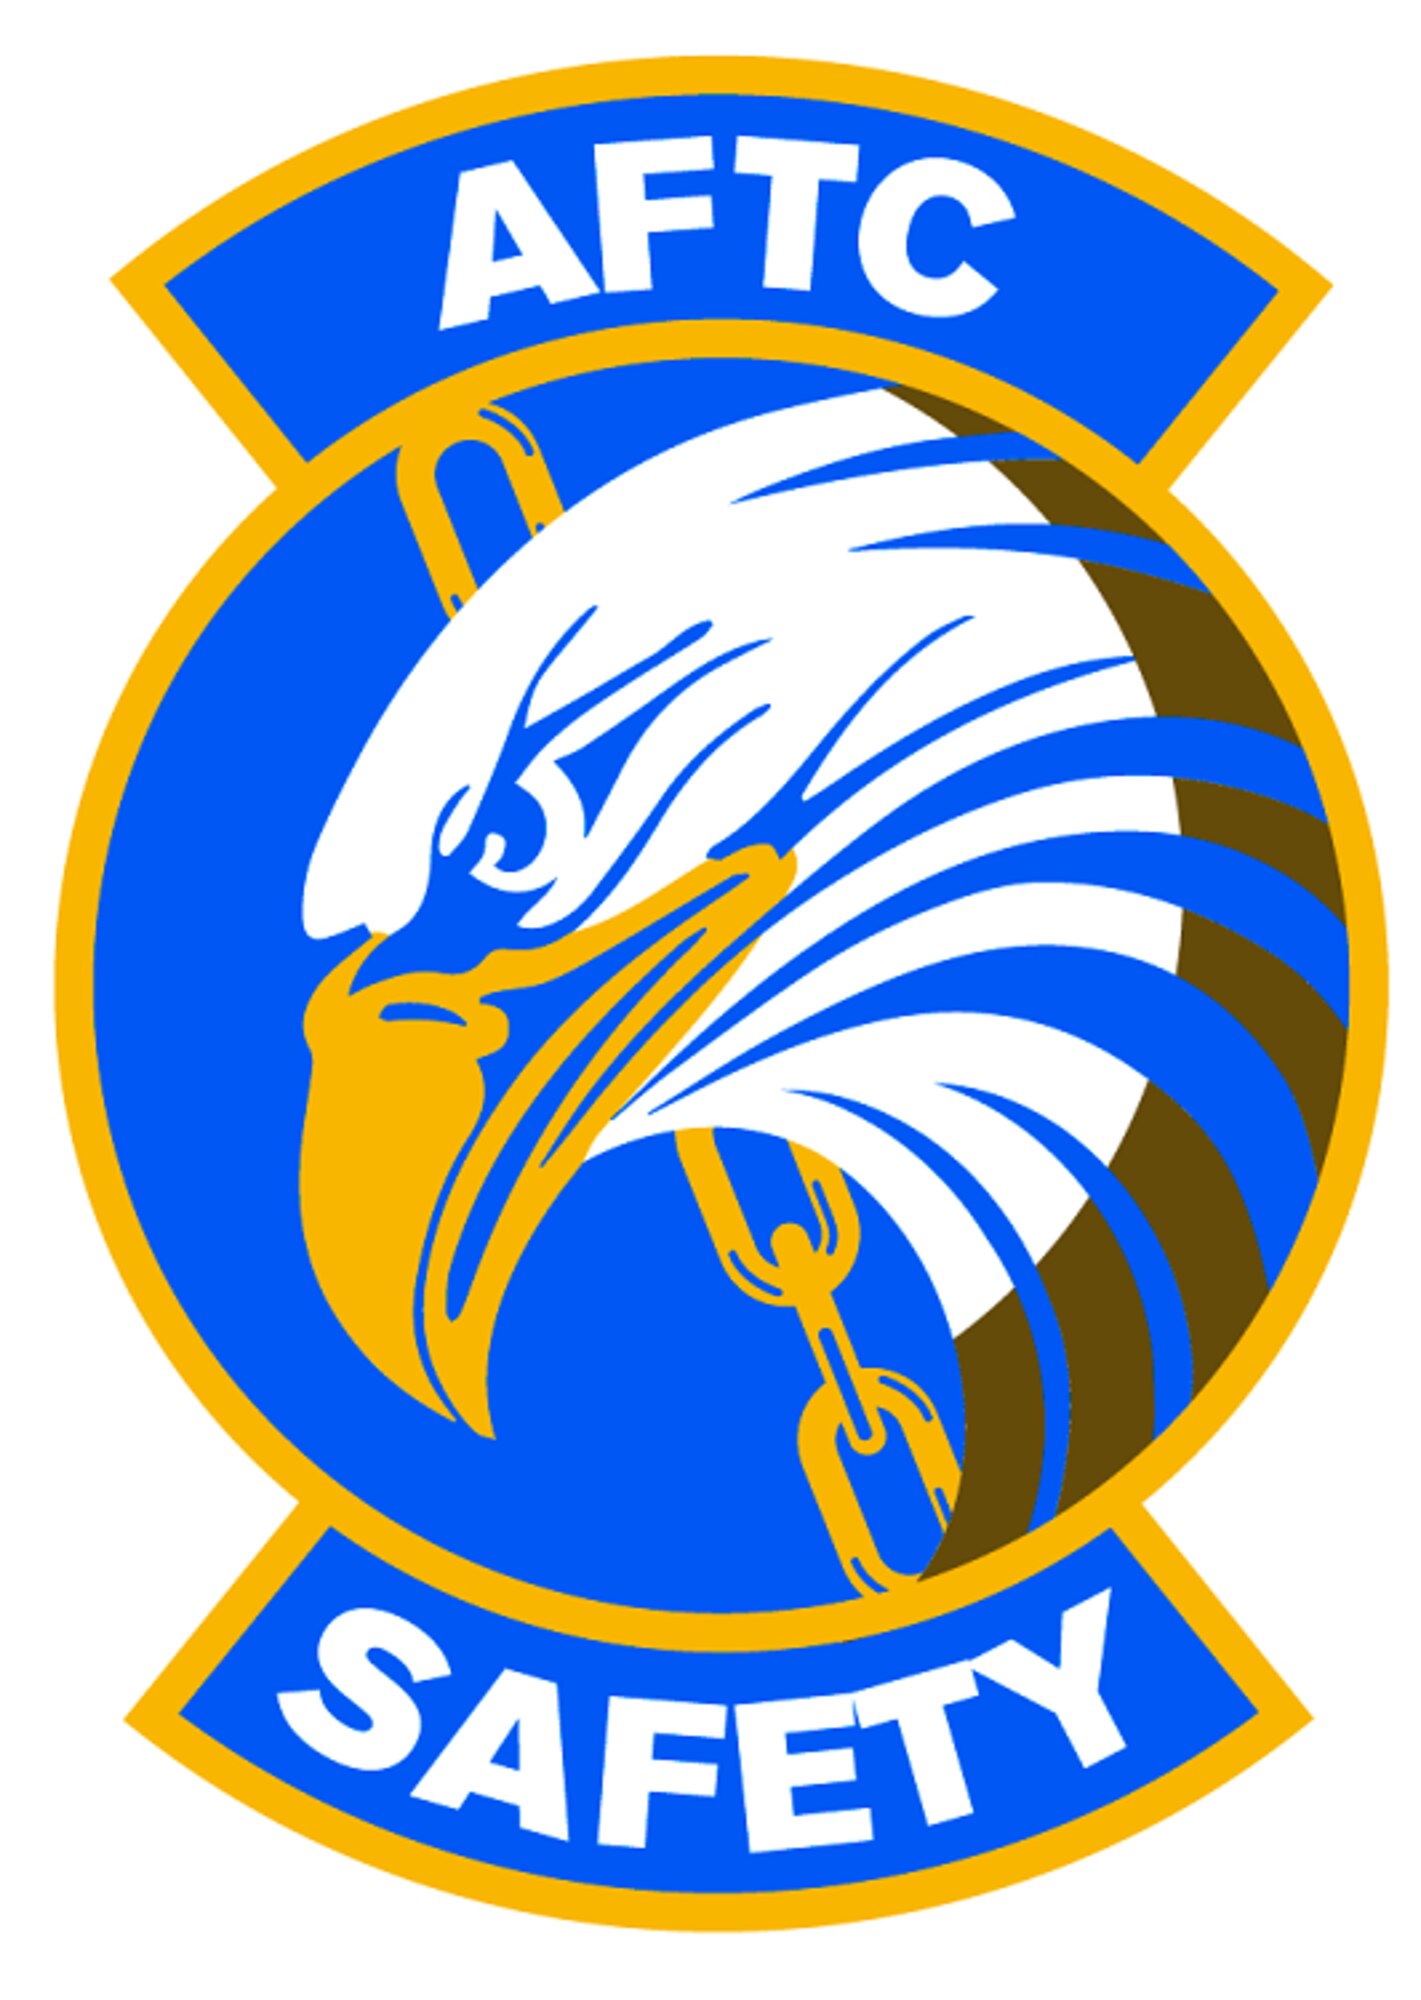 AFTC Safety Office Insignia